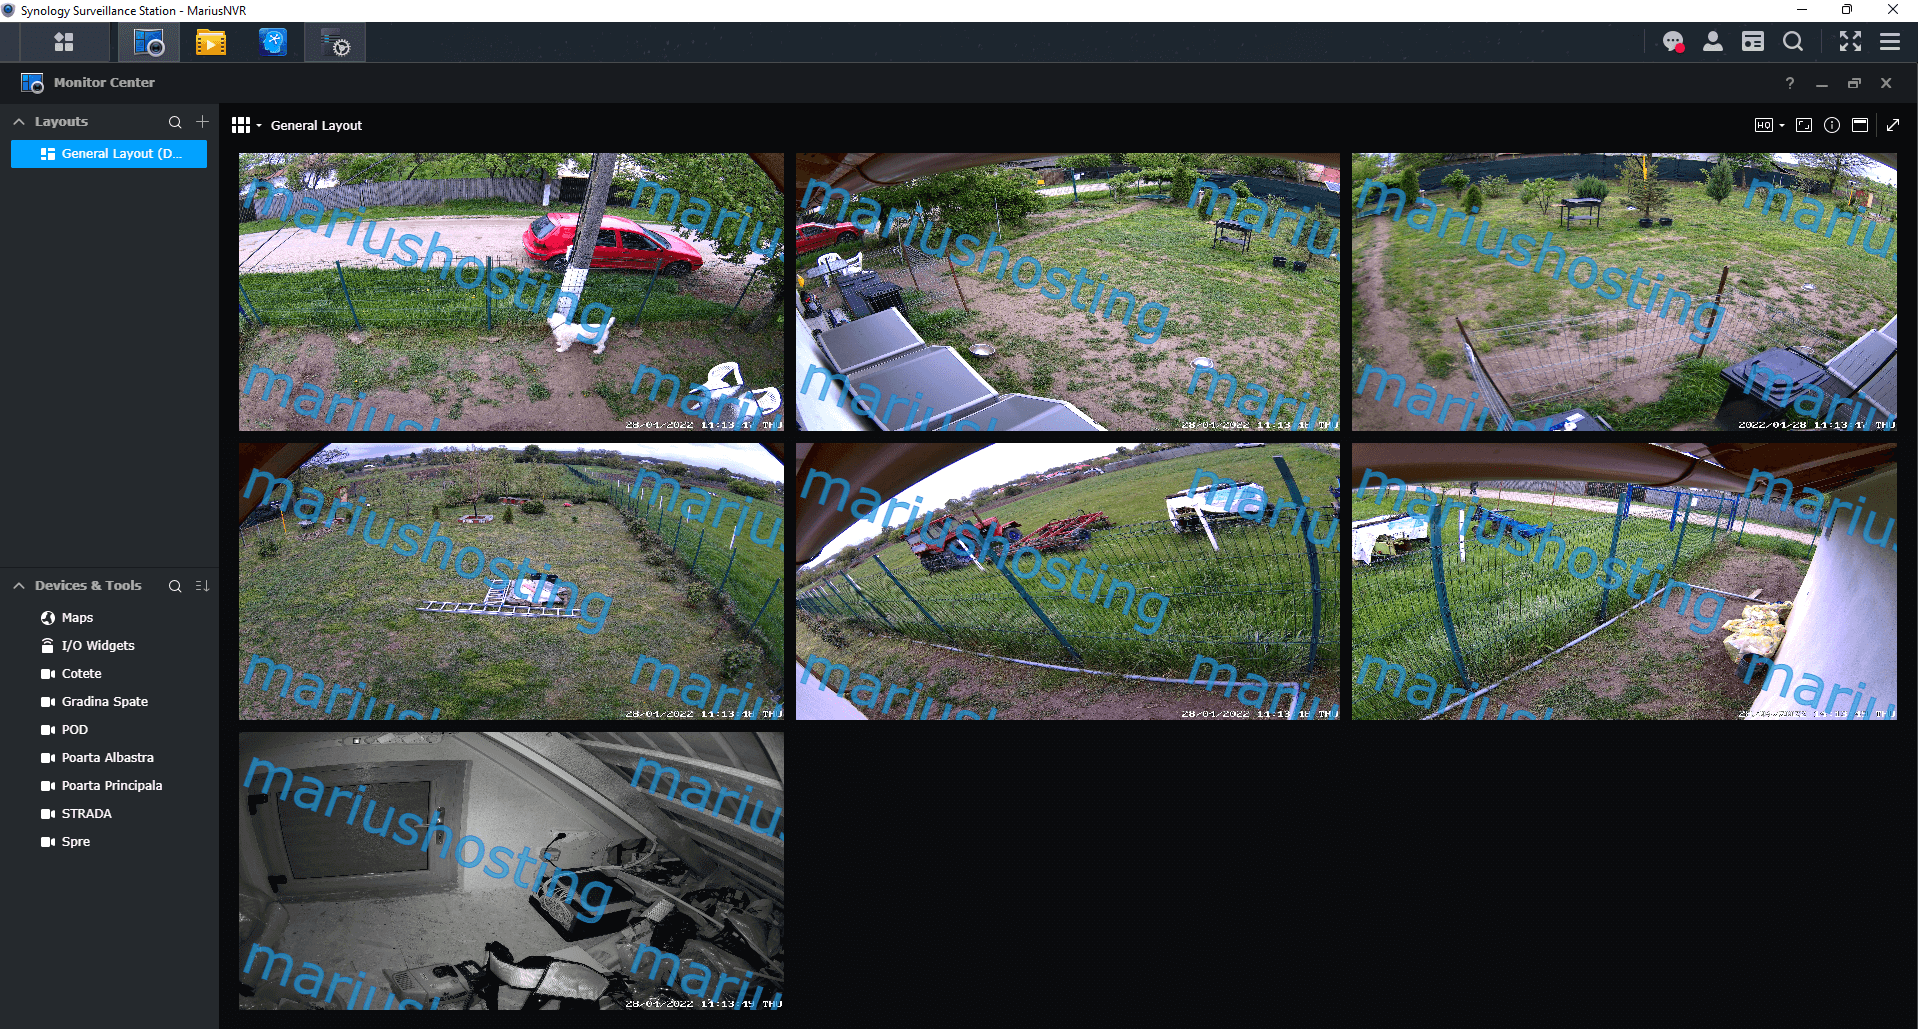 5 Synology Surveillance Station Add Watermark in Live Camera Feed